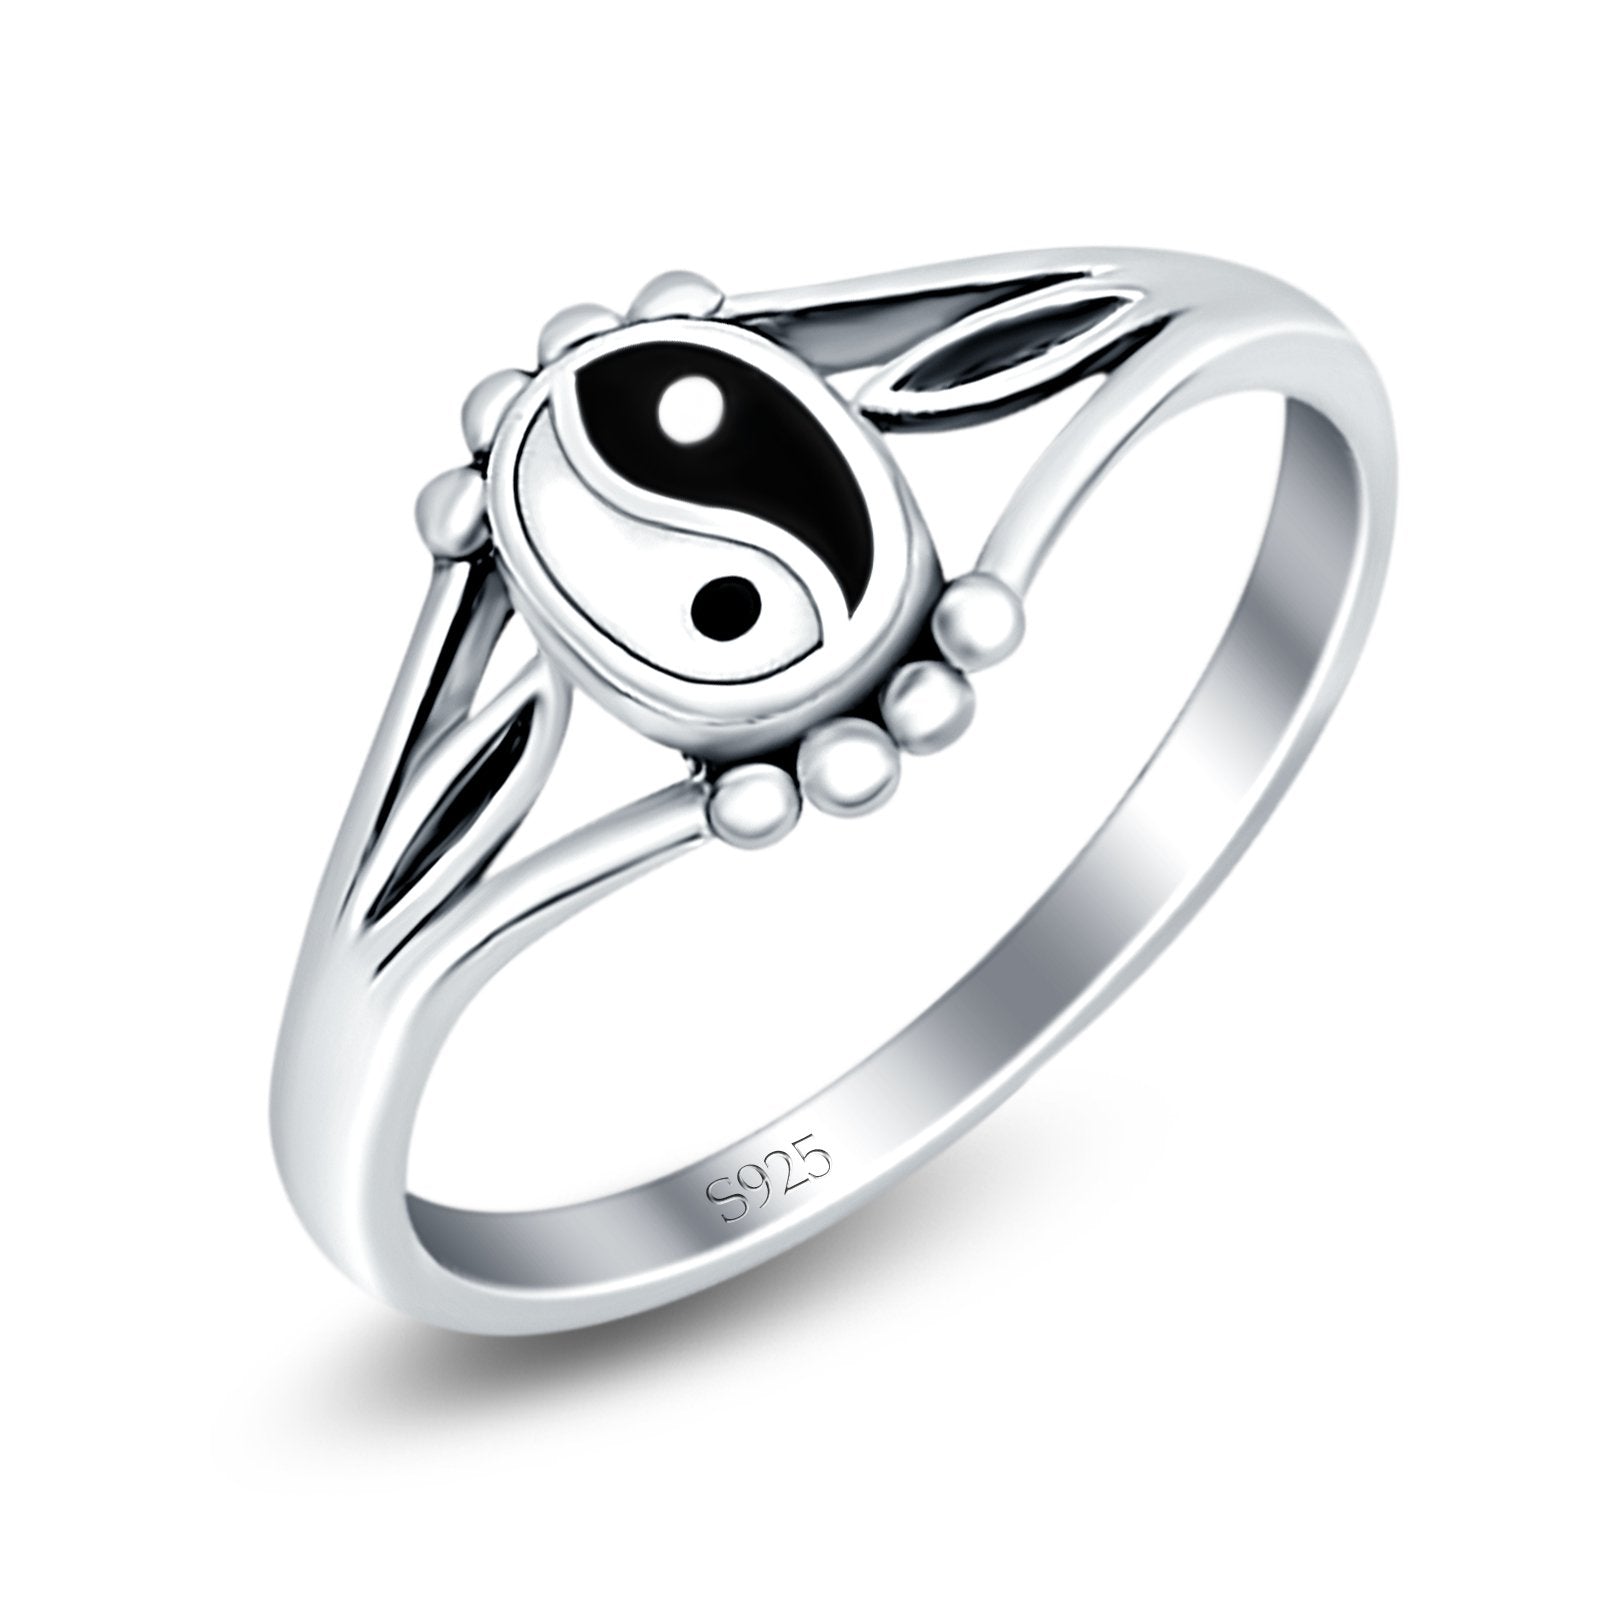 Yin and Yang Plain Ring Oxidized Band Solid 925 Sterling Silver